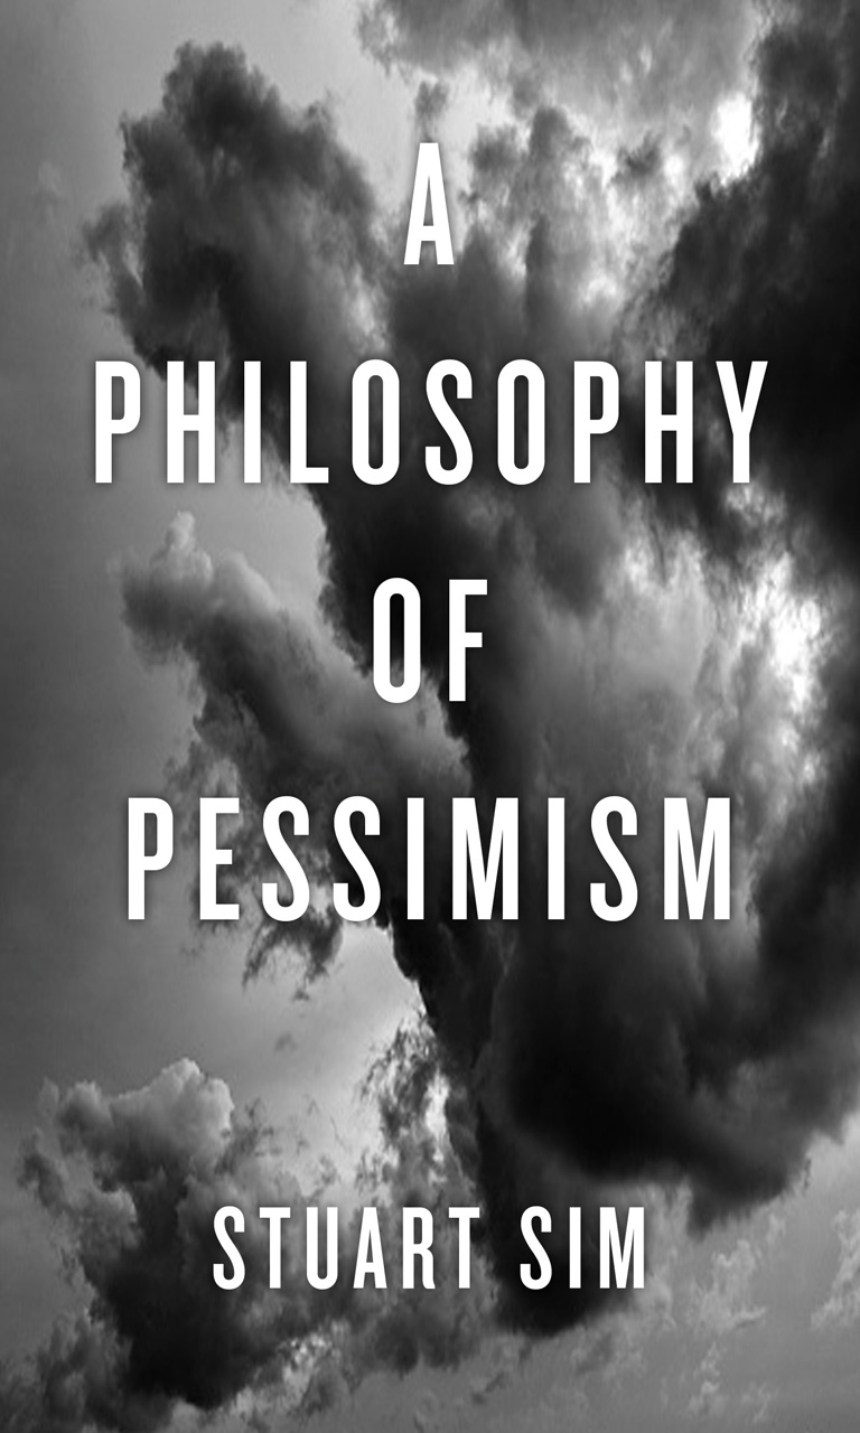 A Philosophy of Pessimism